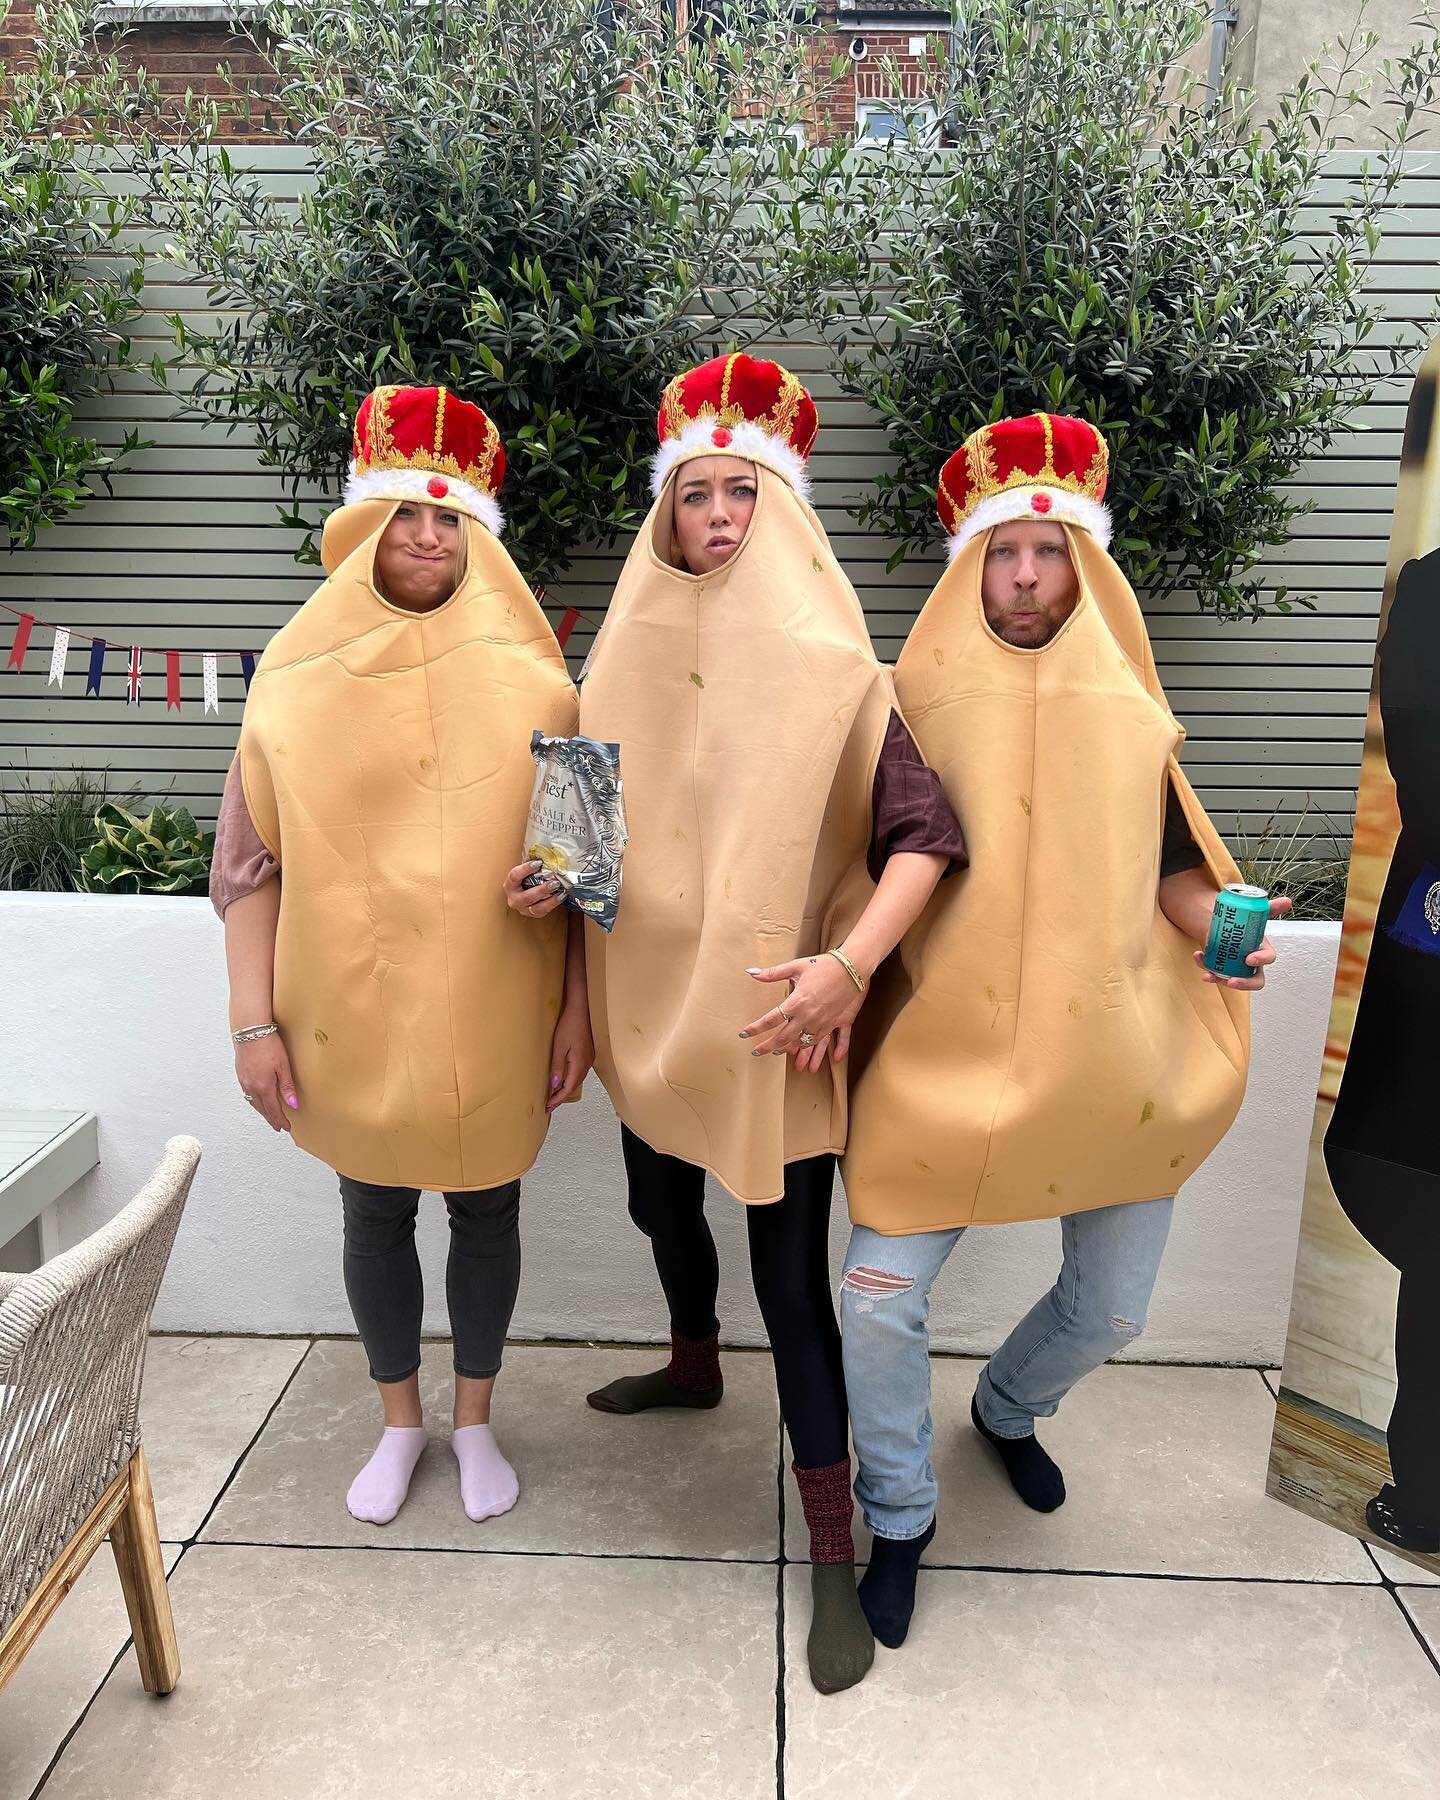 KING EDWARD POTATOES 🥔😂
Well @joshsmithhosts and @tomcouch did say to come as anything Royal right?!!! And you lot were convinced we&rsquo;d be Corgis 😝
Epic party and everyone made such a brilliant effort as always! Now the big question is did an